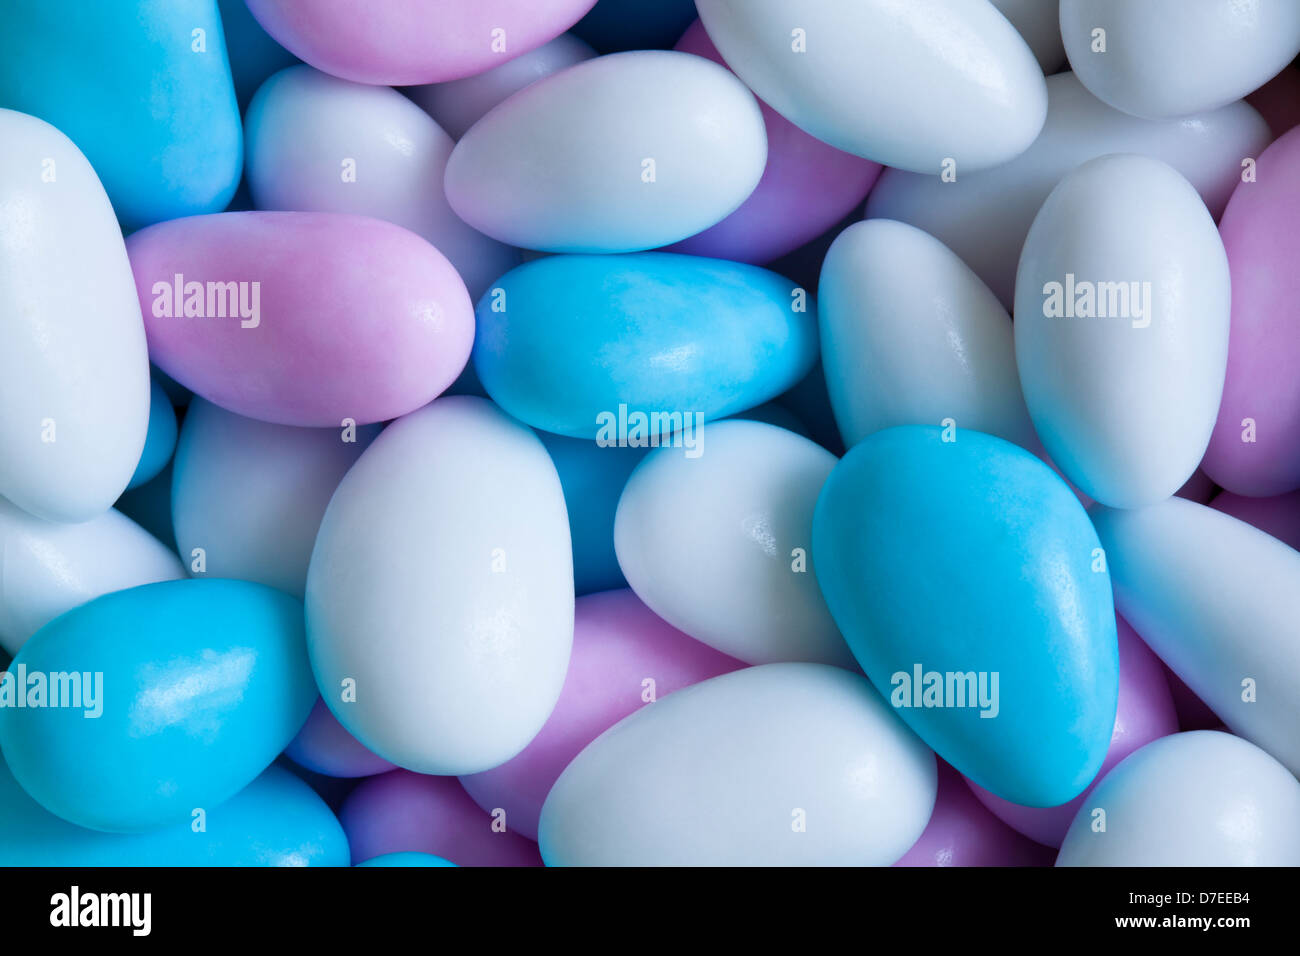 white and blue candies Stock Photo